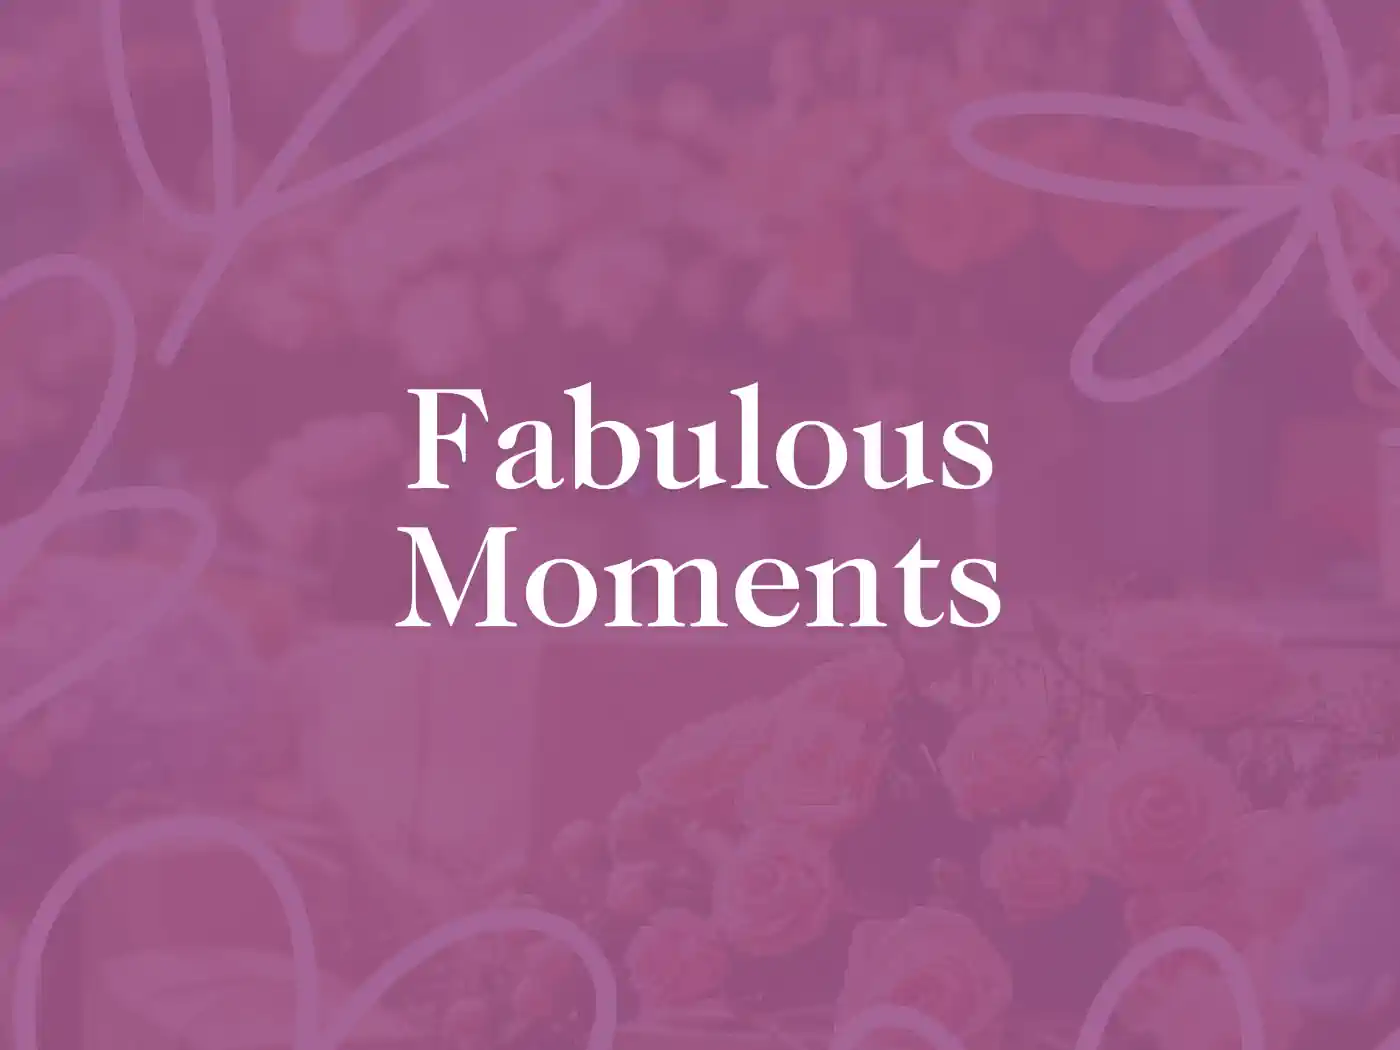 Celebration background with the text 'Fabulous Moments' - Fabulous Flowers and Gifts.